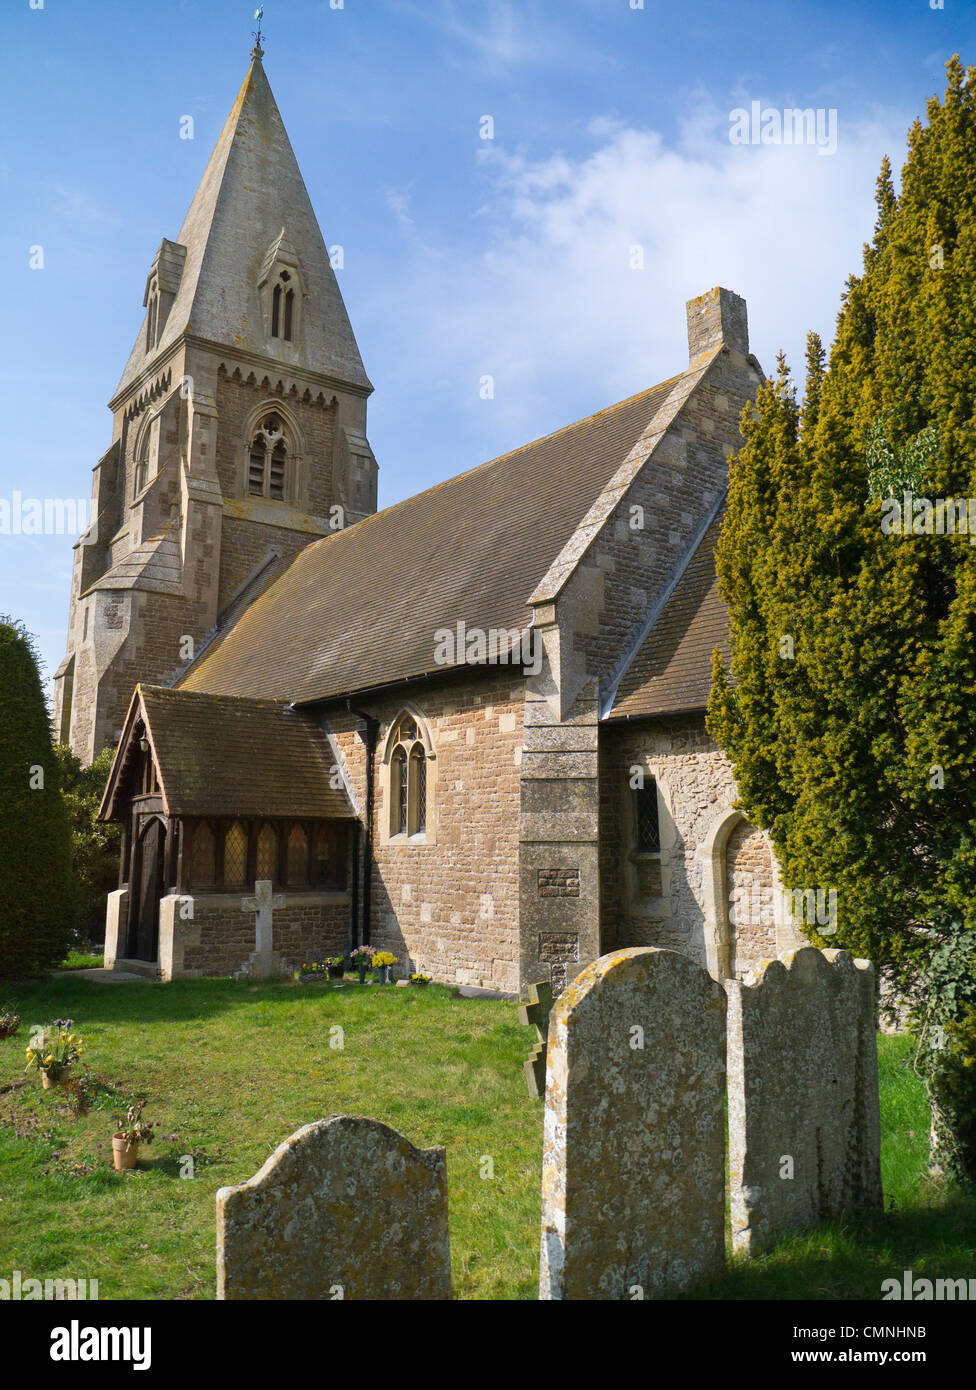 Saint Peter and Saint Paul - a tiny church in Appleford Village, Oxfordshire 2 Stock Photo